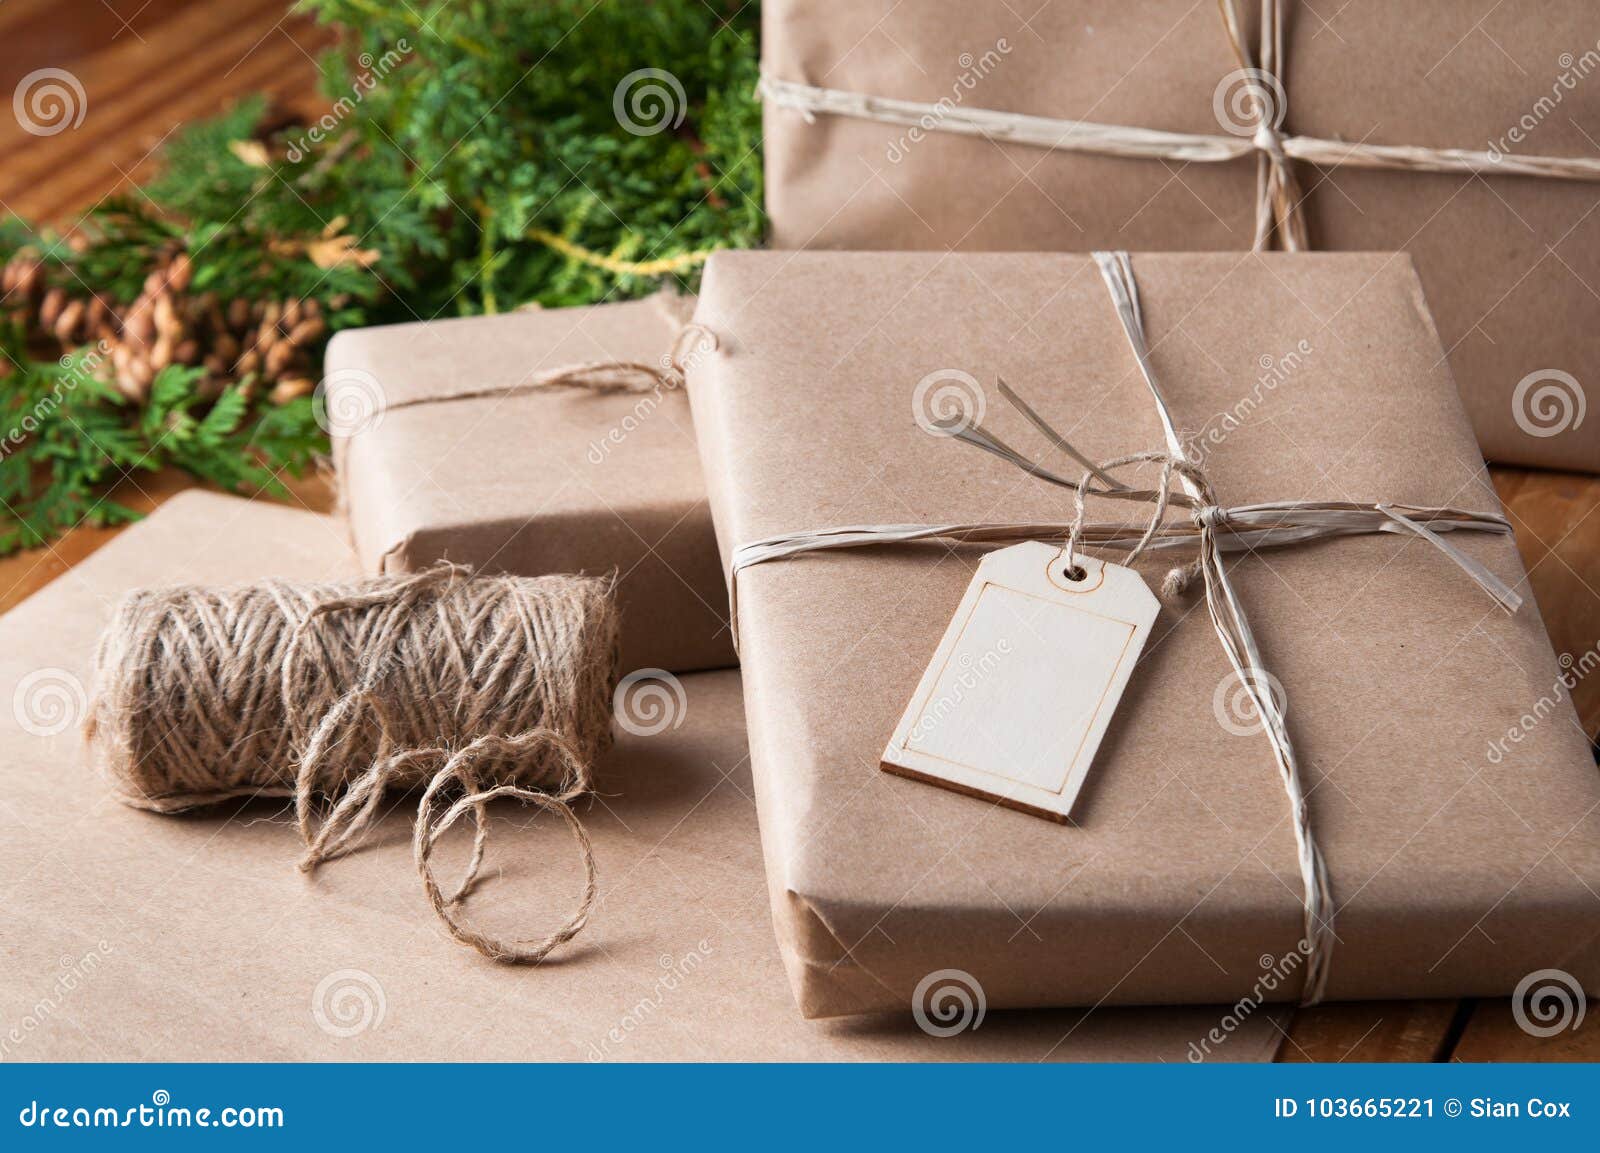 Brown Paper Packages Tied Up With String - Parade